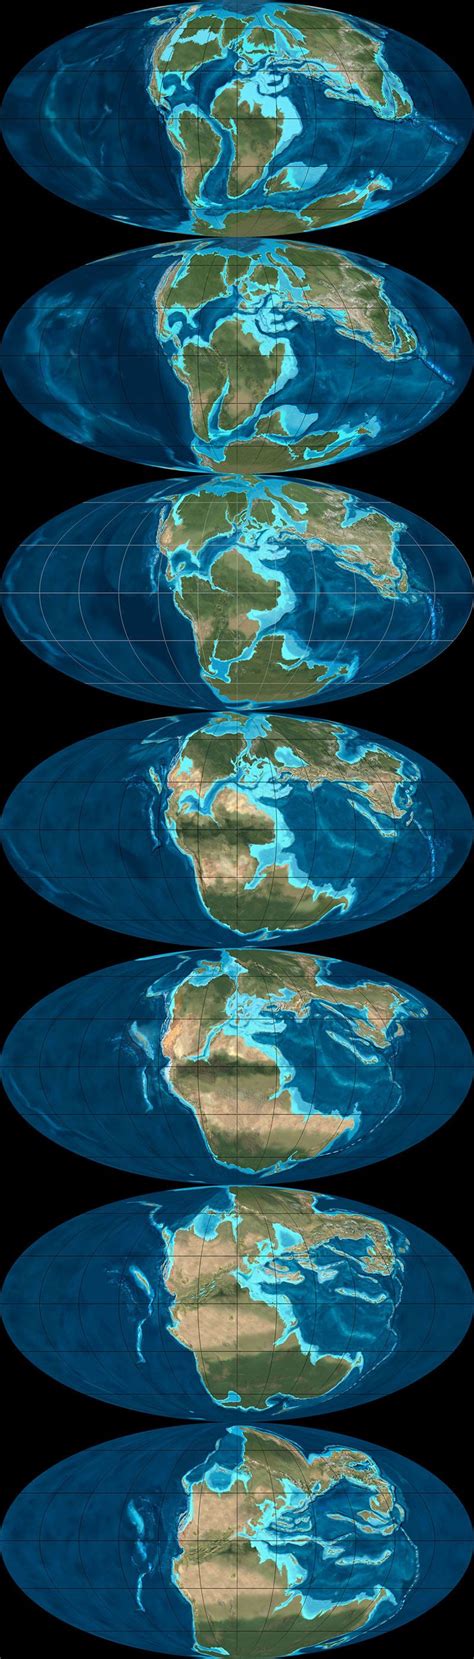 What Did The Continents Look Like Millions Of Years Ago Geology History Of Earth Earth Science